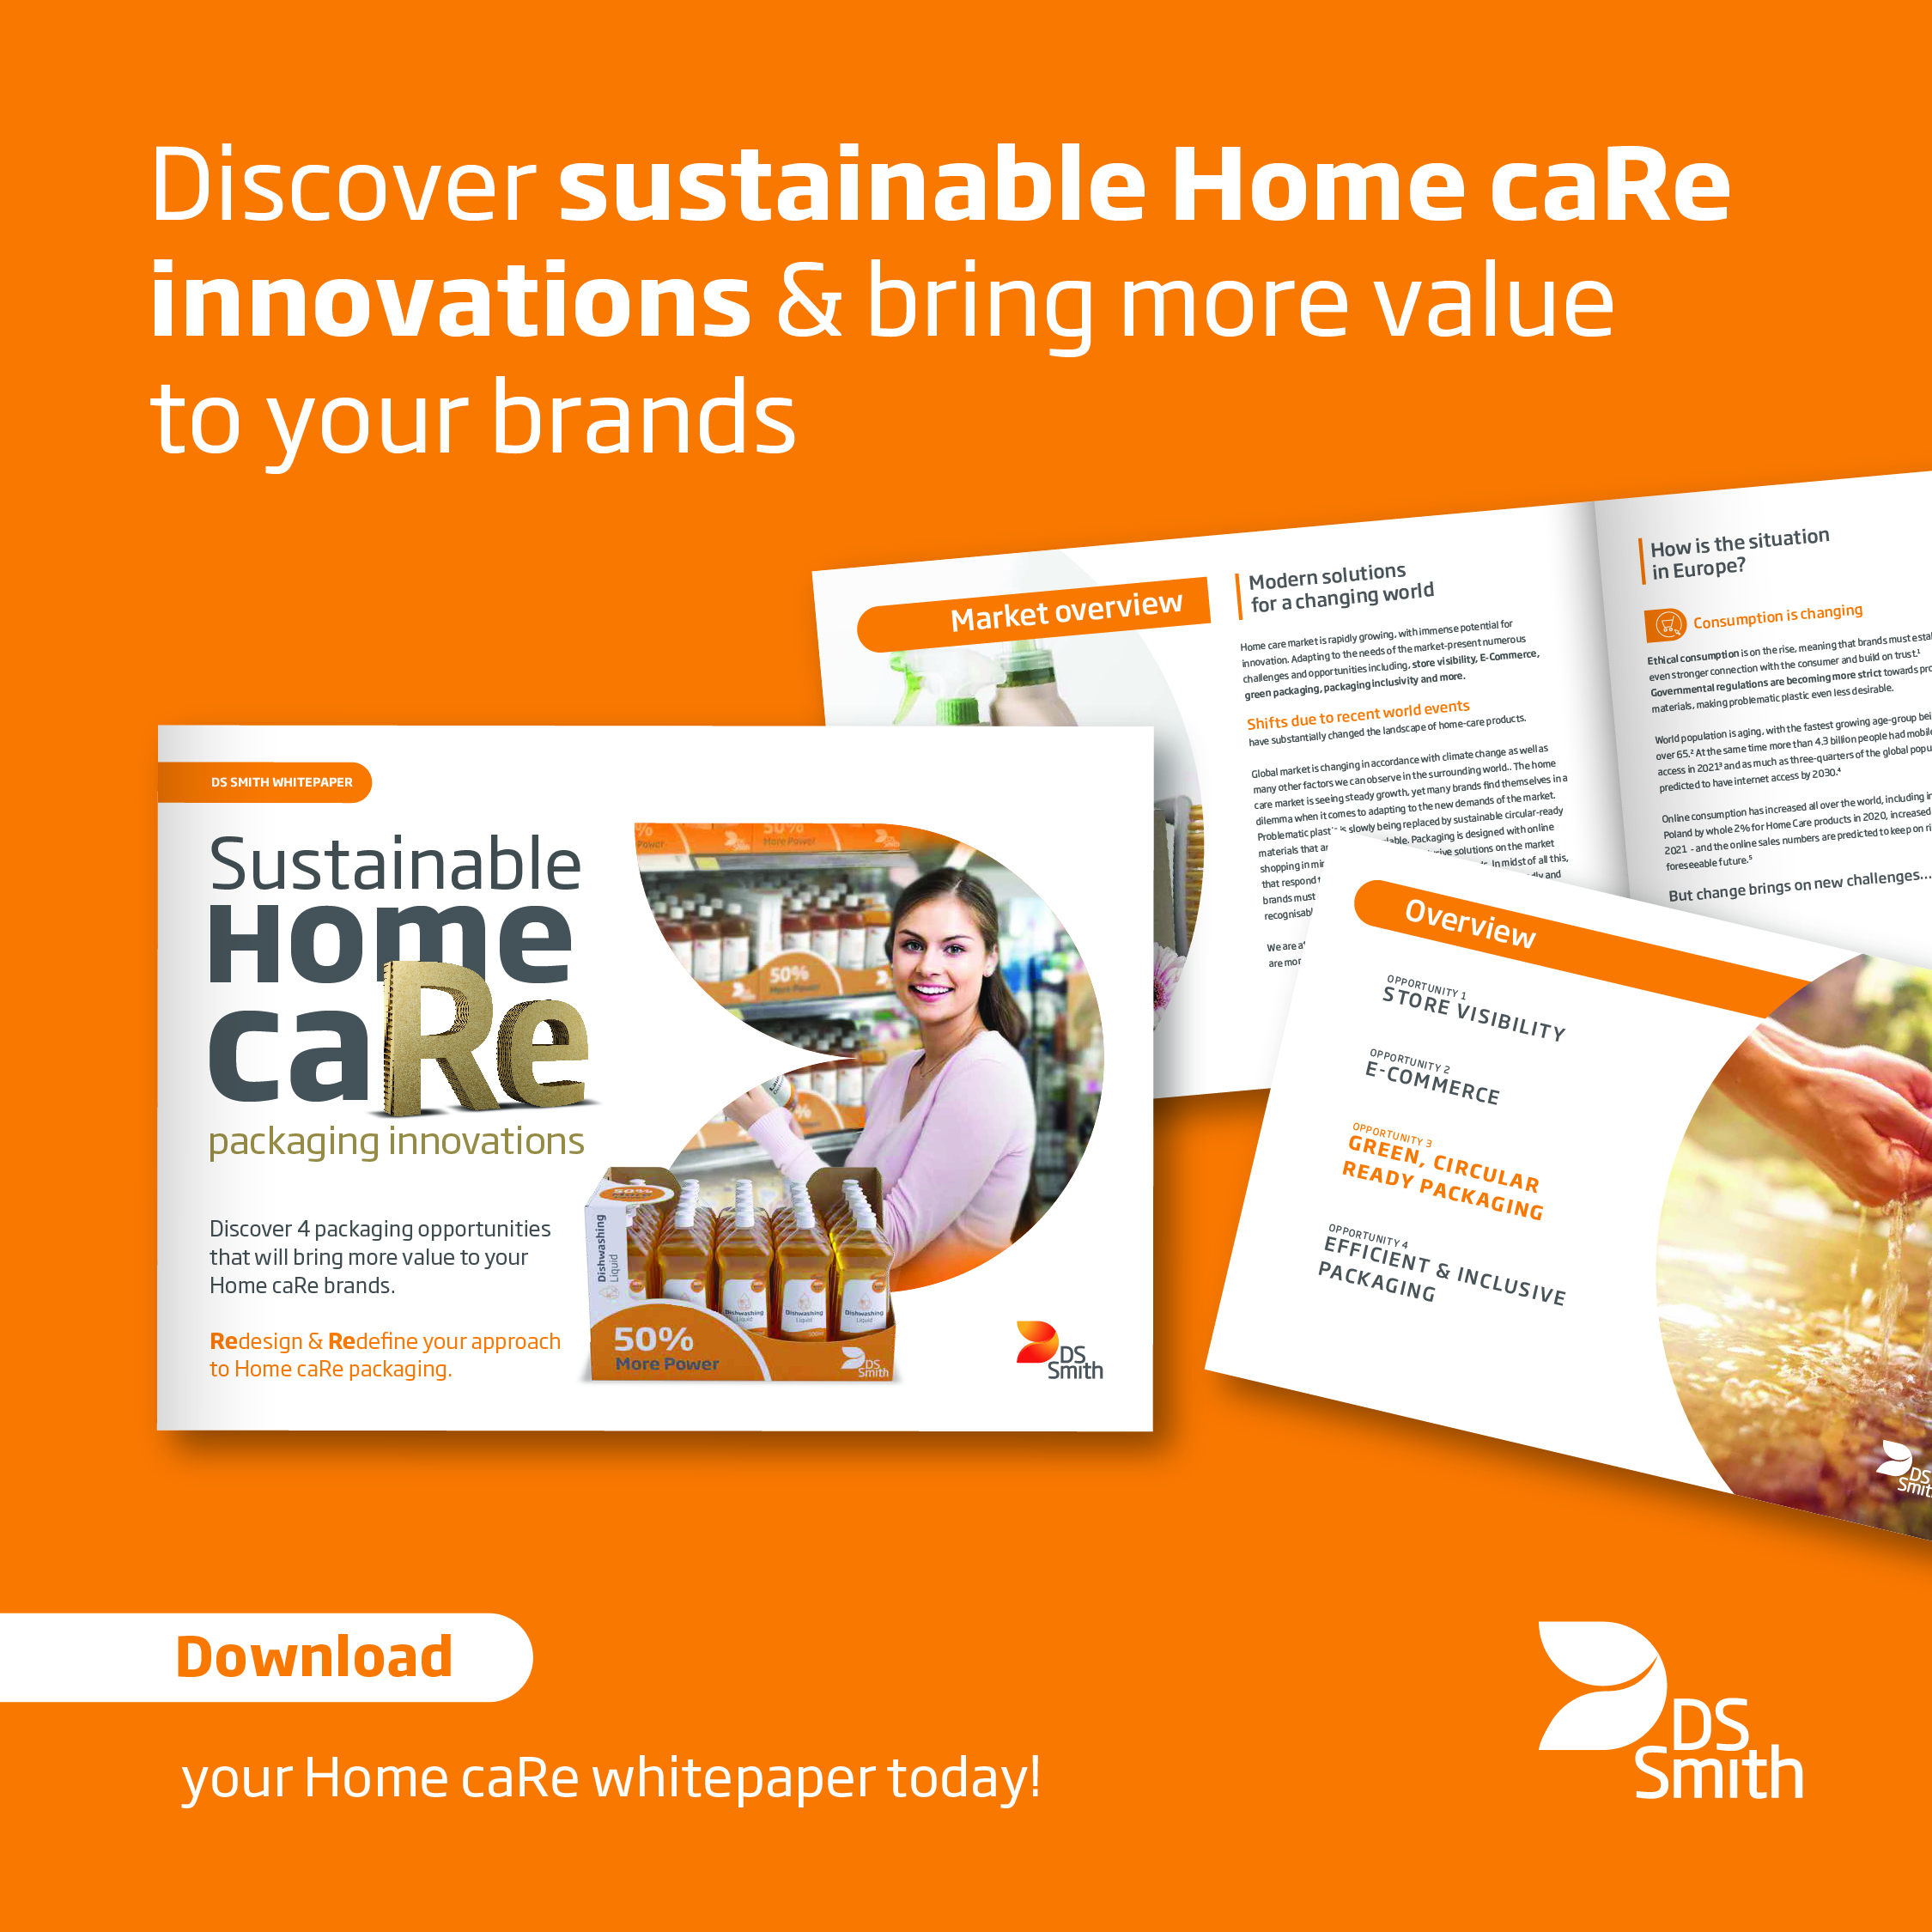 DS Smith Home caRe packaging whitepaper